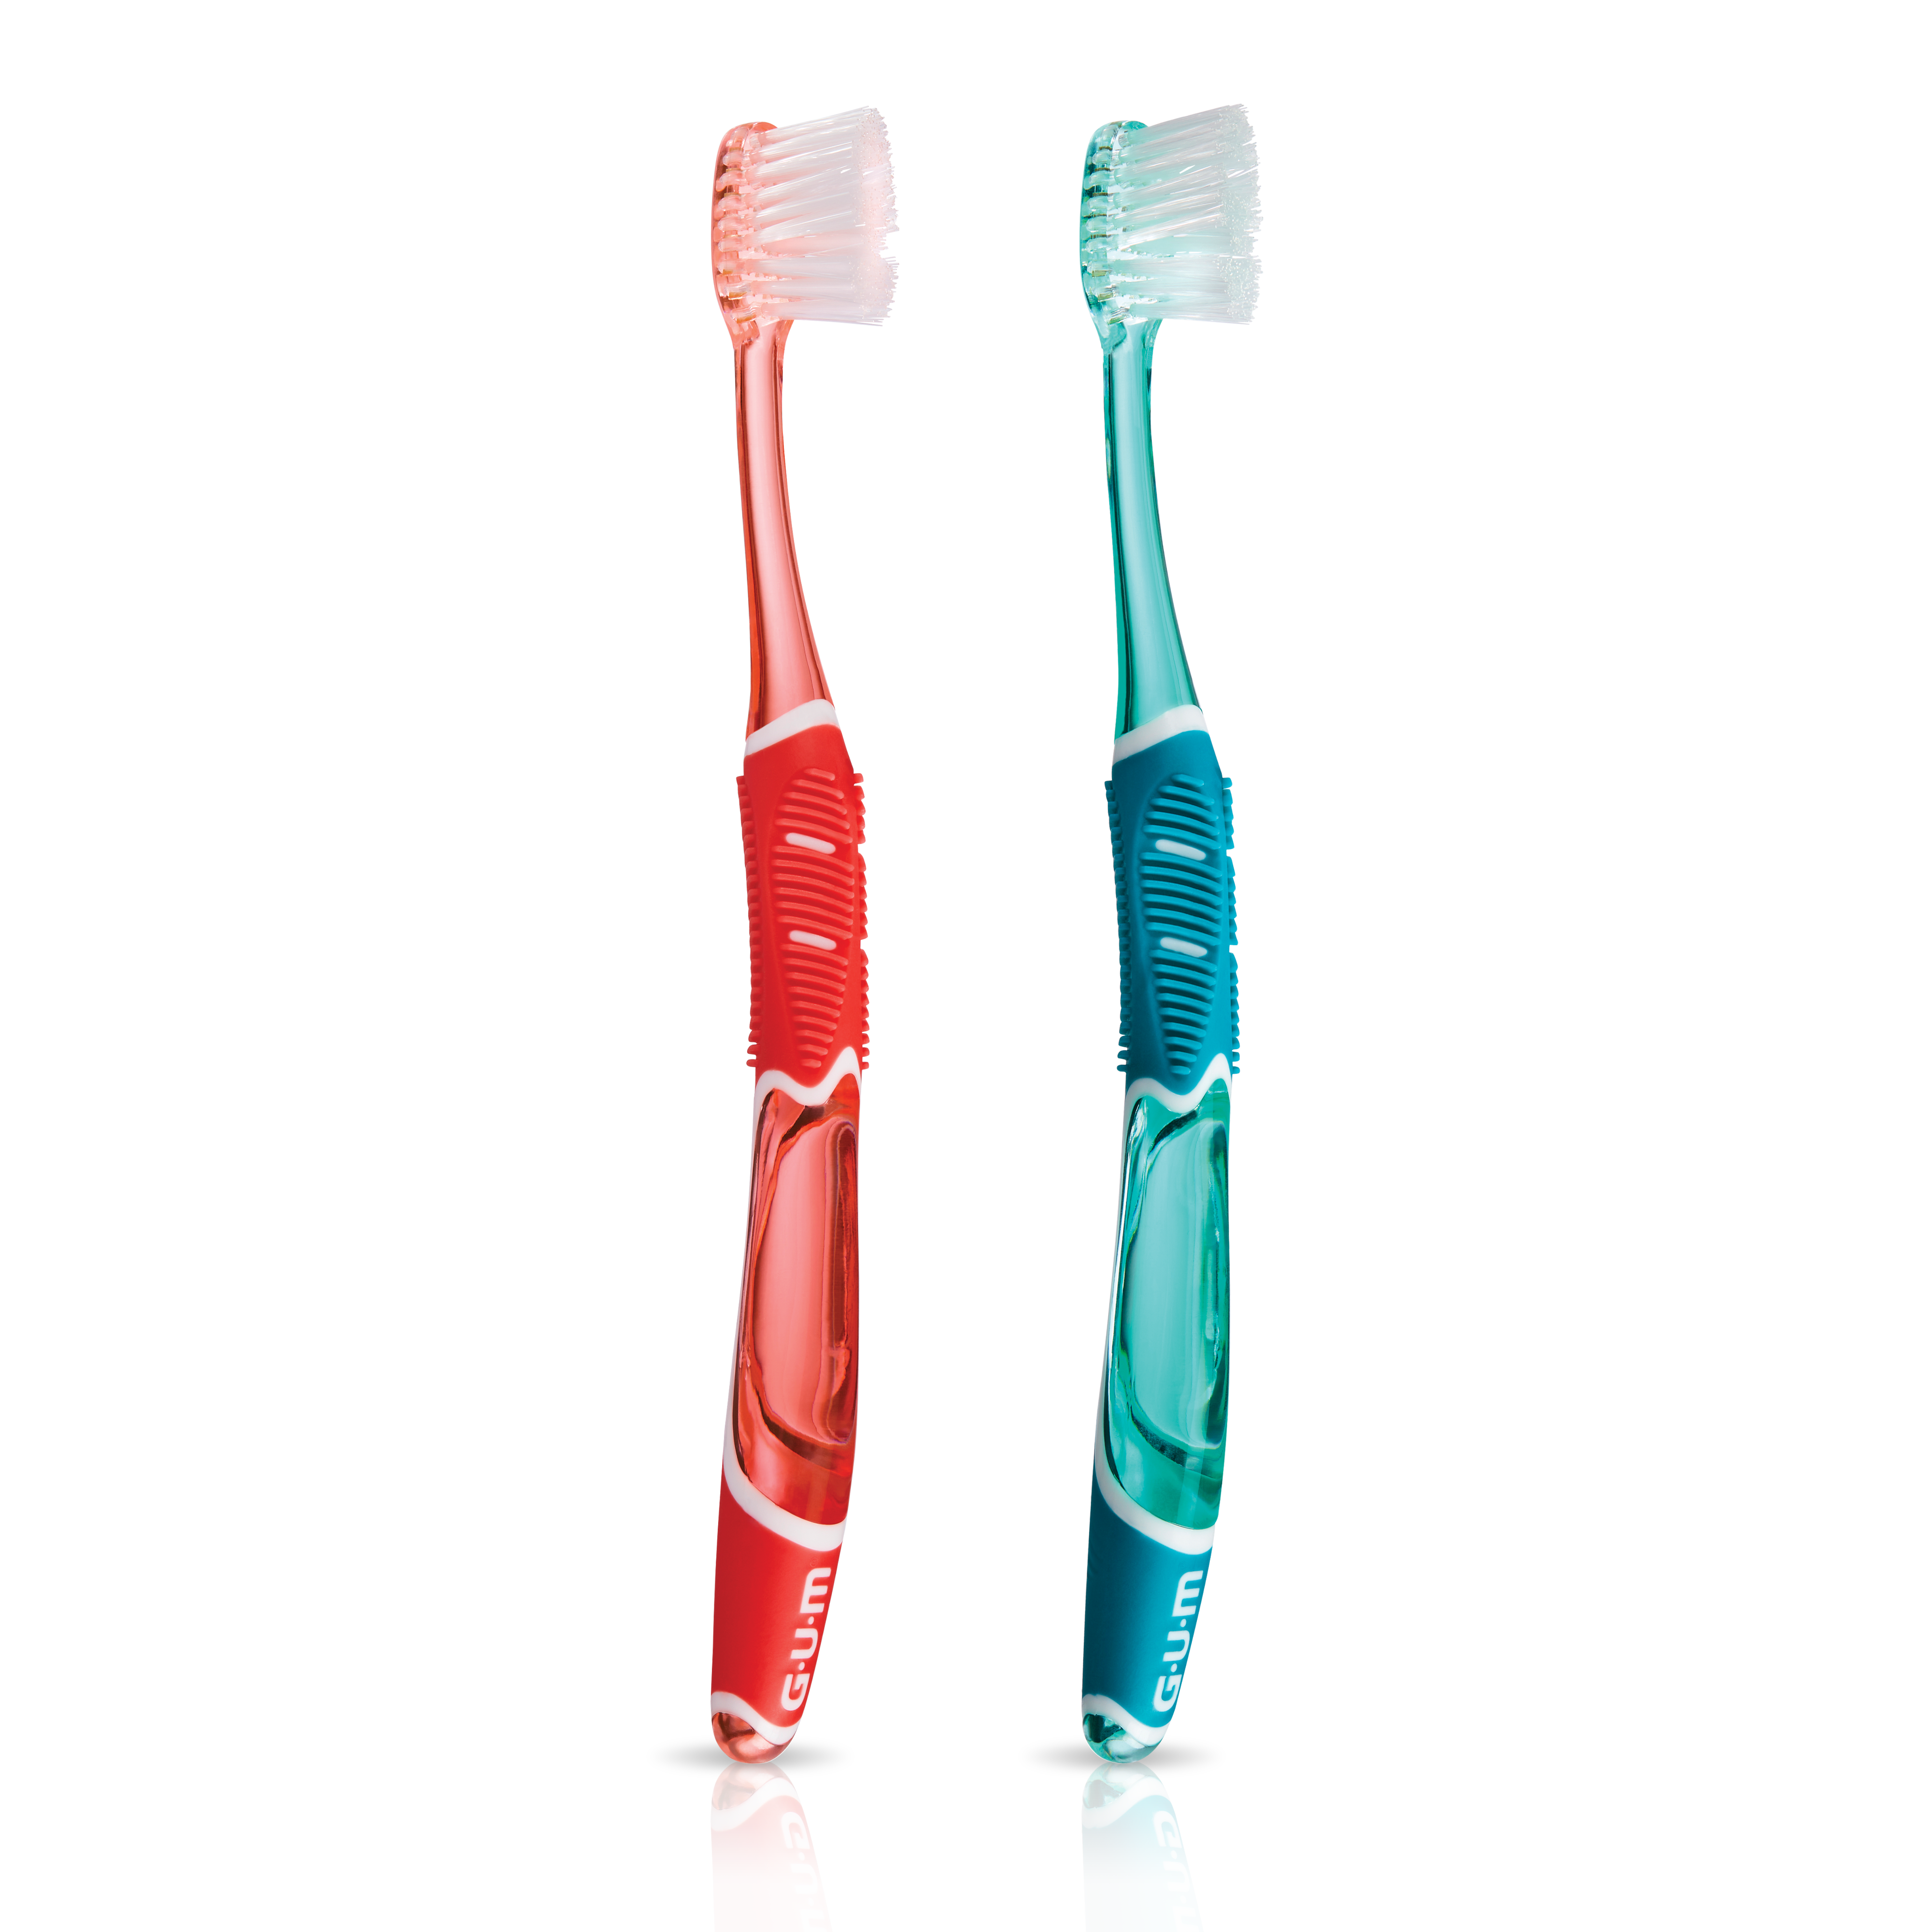 535-Product-Toothbrush-Manual-Technique-DailyClean-naked-2colors.png